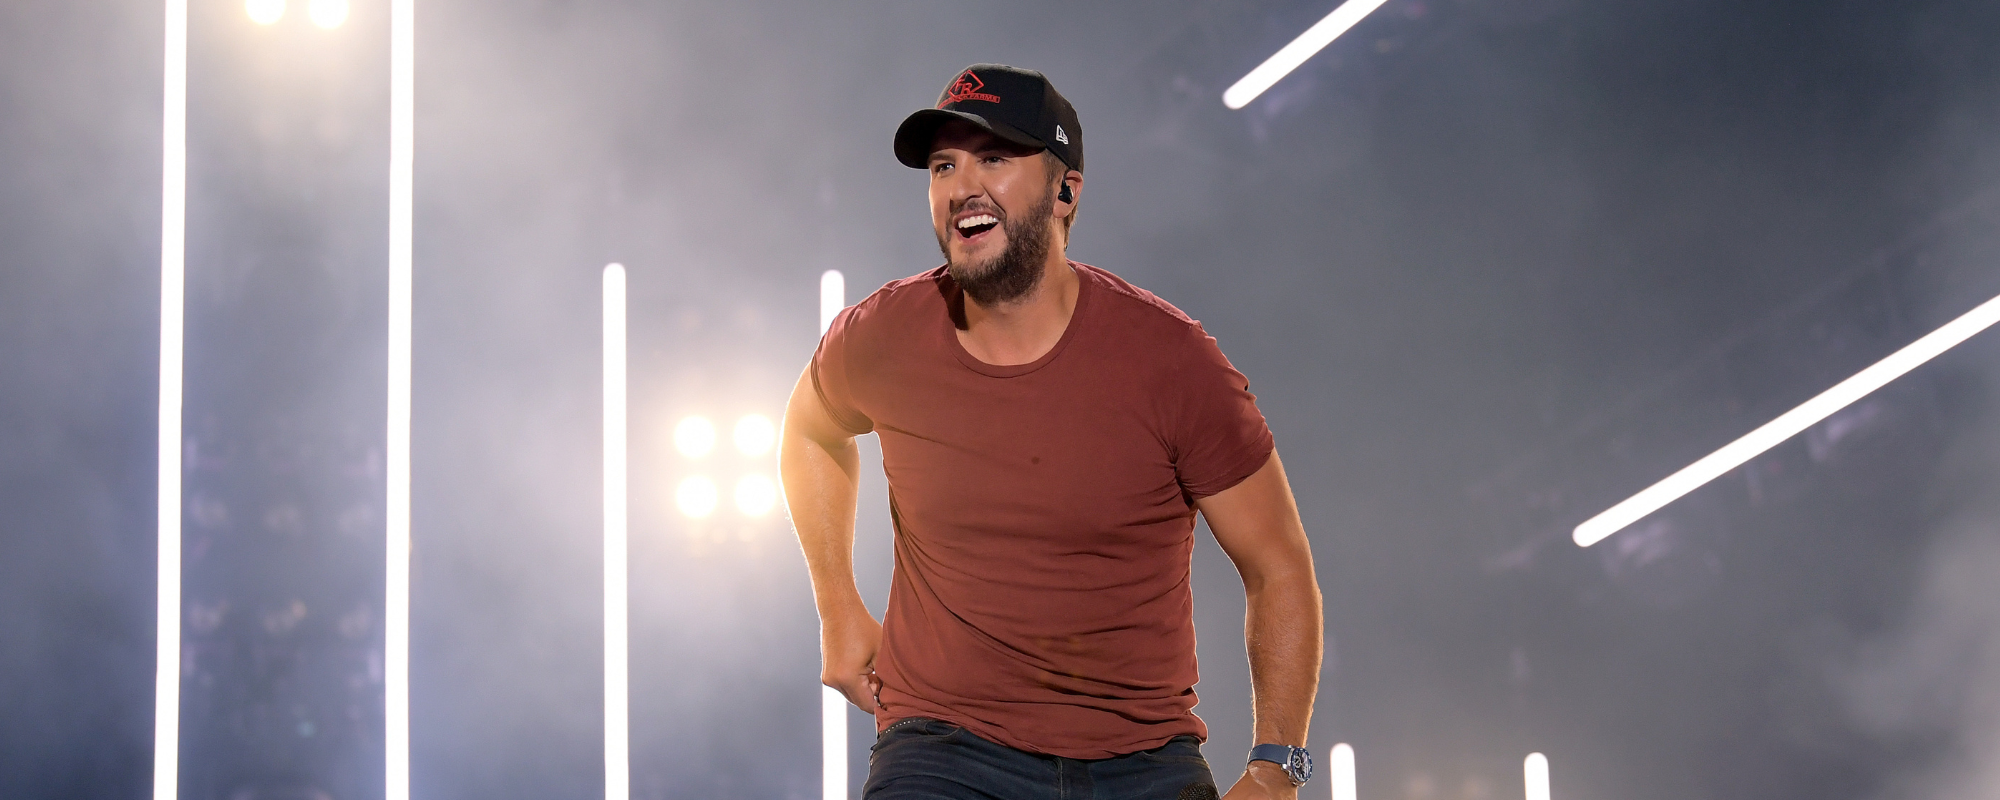 The Meaning of Luke Bryan’s Swooning Song”I Don’t Want This Night to End”